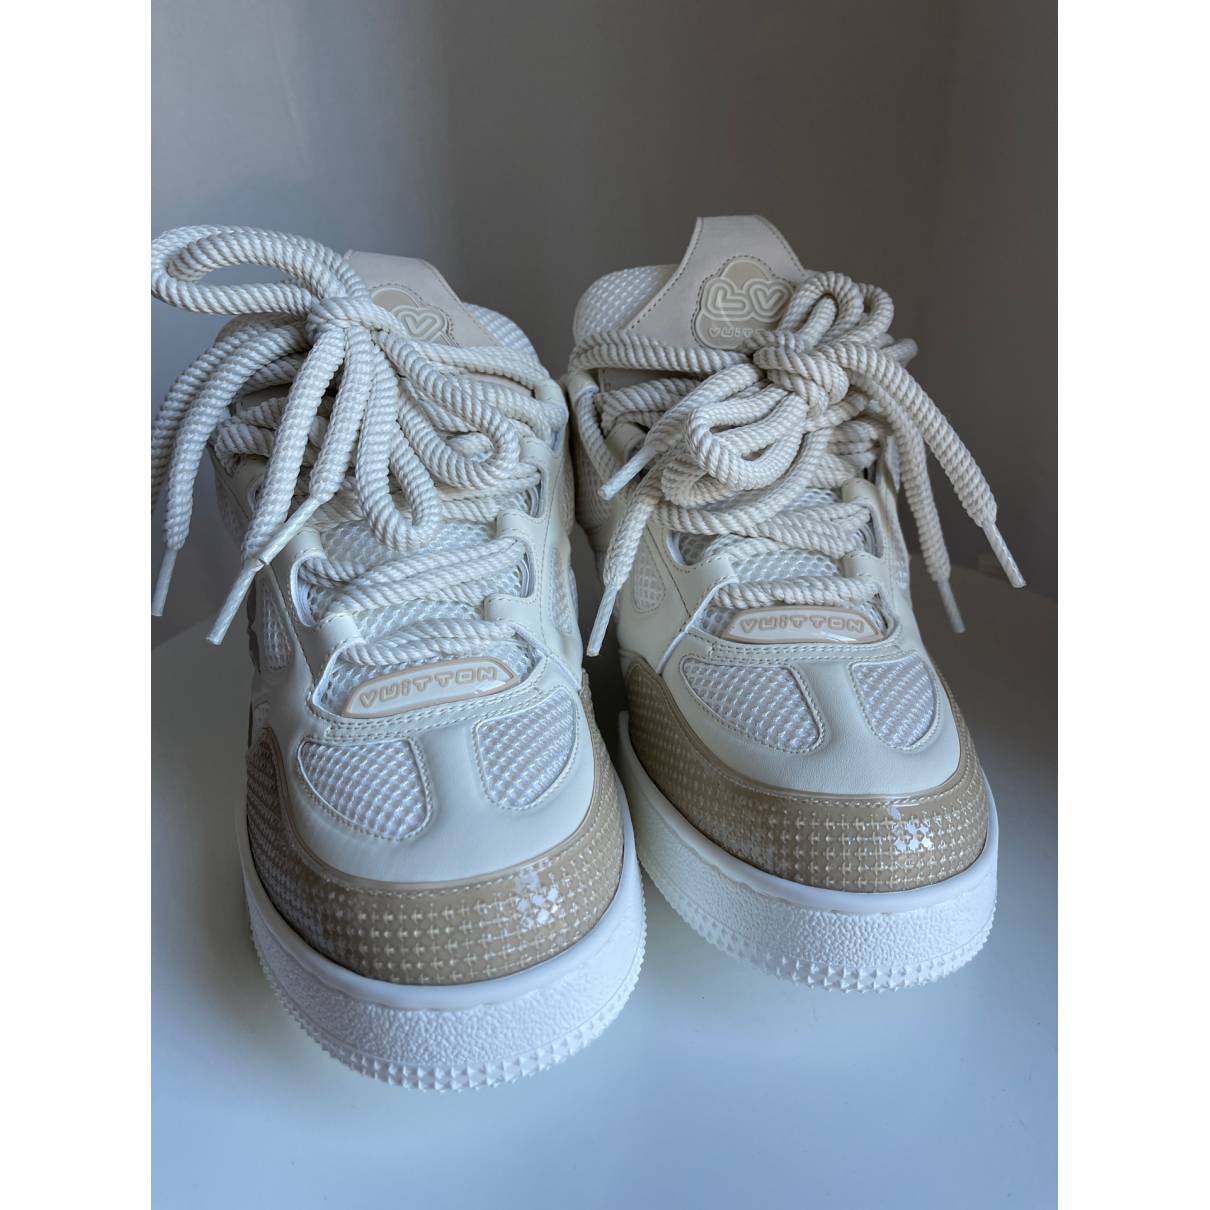 Lv trainer leather trainers Louis Vuitton Beige size 42 EU in